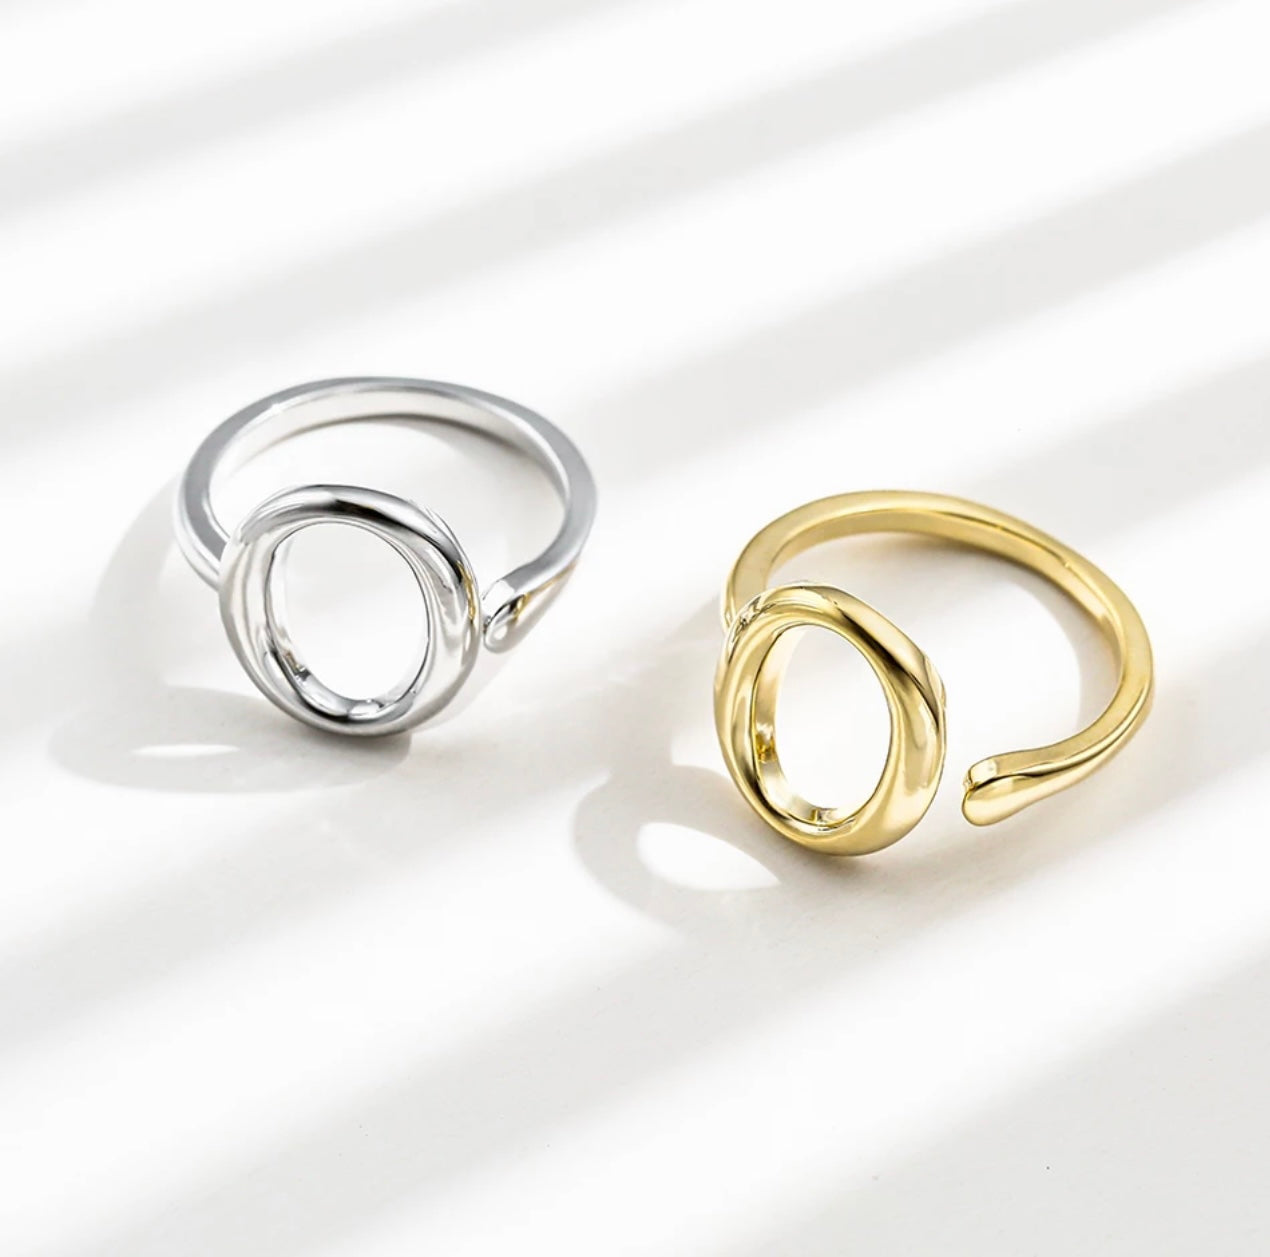 The minimalist Circular sterling silver ring